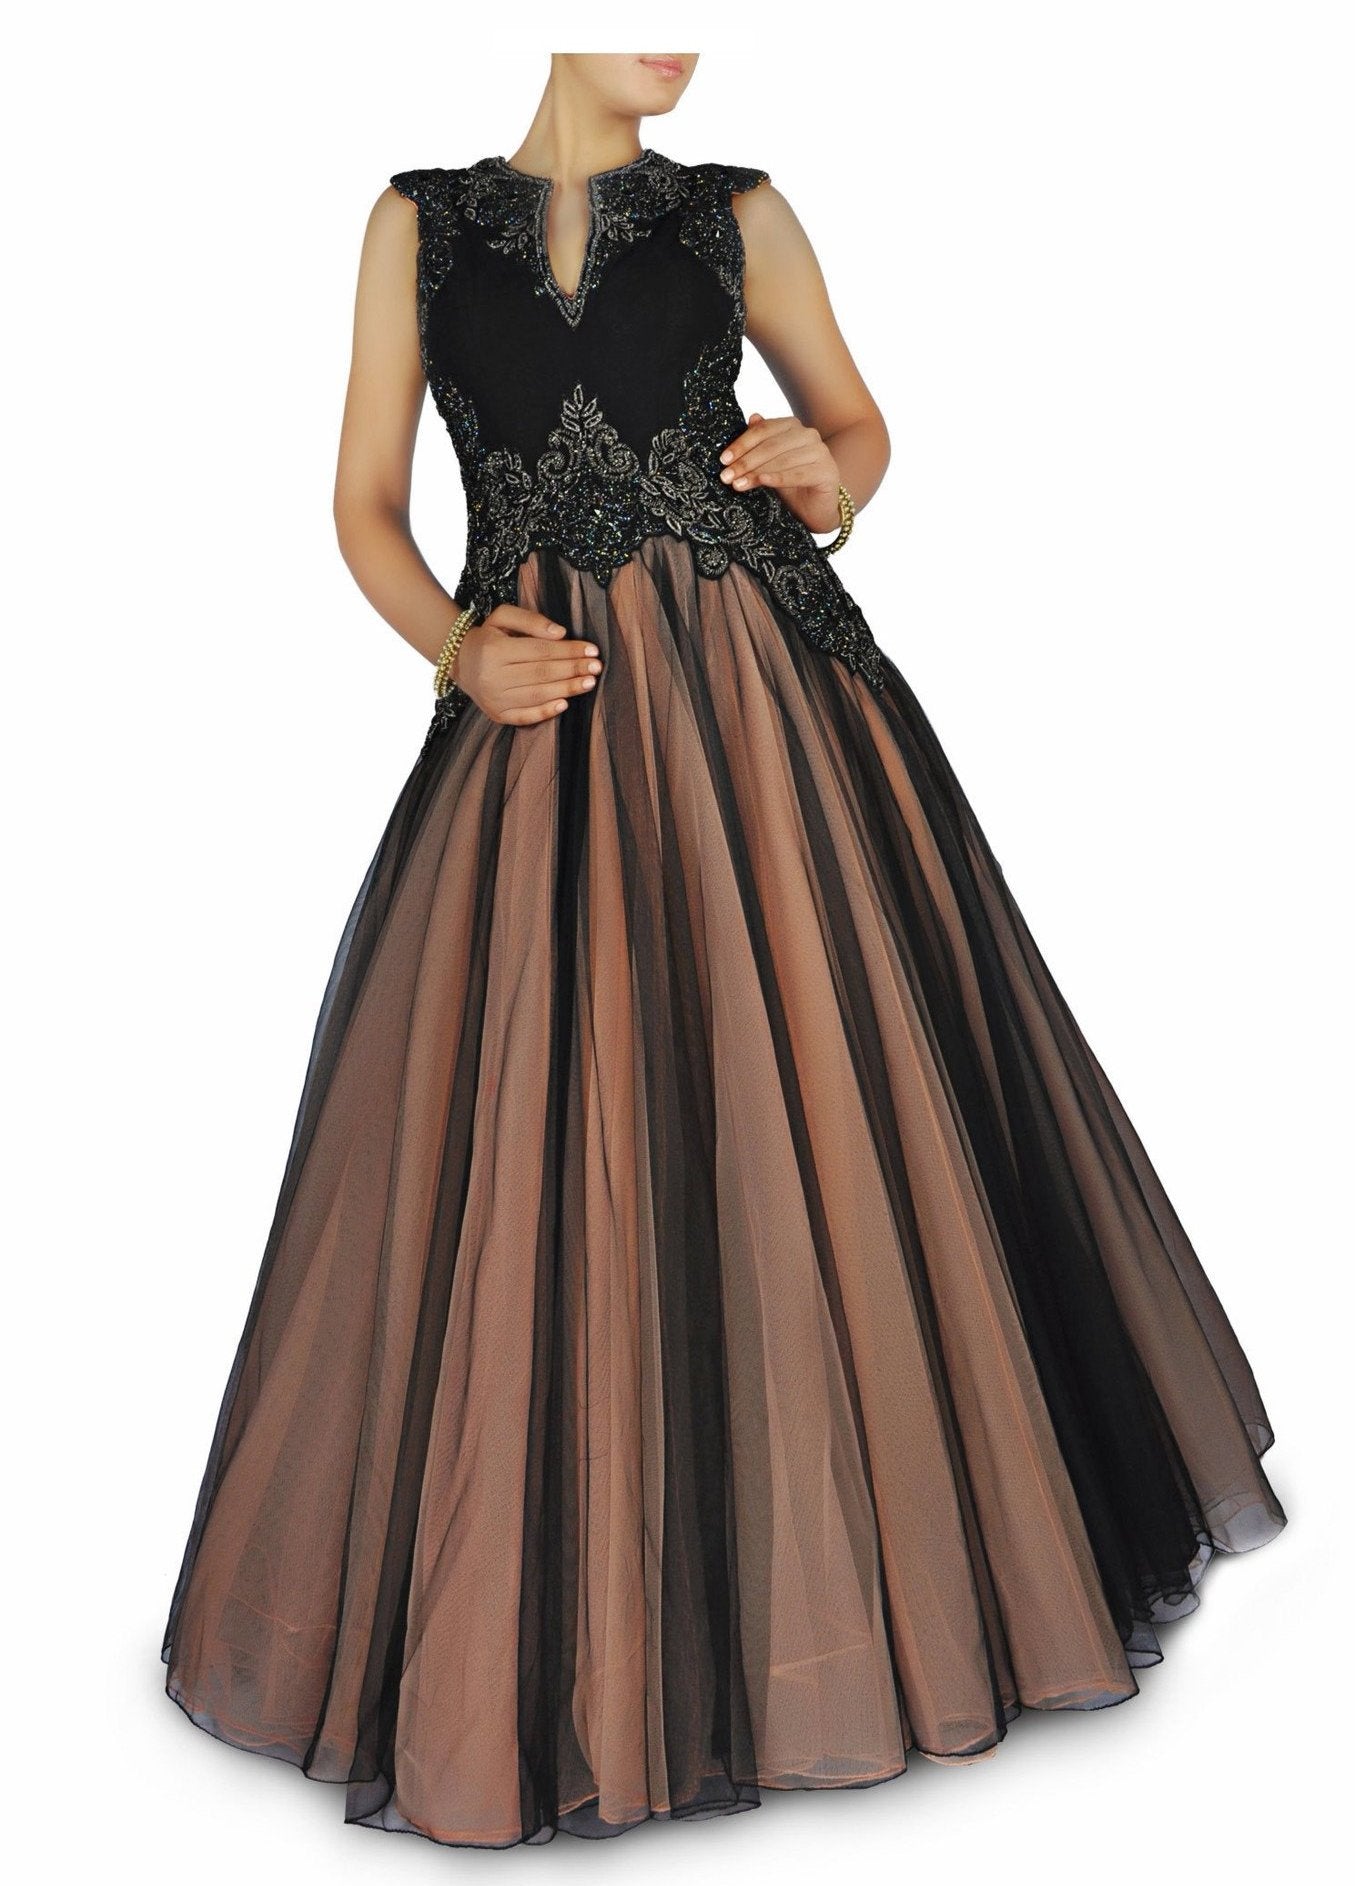 Sateen Silk Party Wear Ready made Gown In Black Color With Embroidery Work  - Gown - Sale